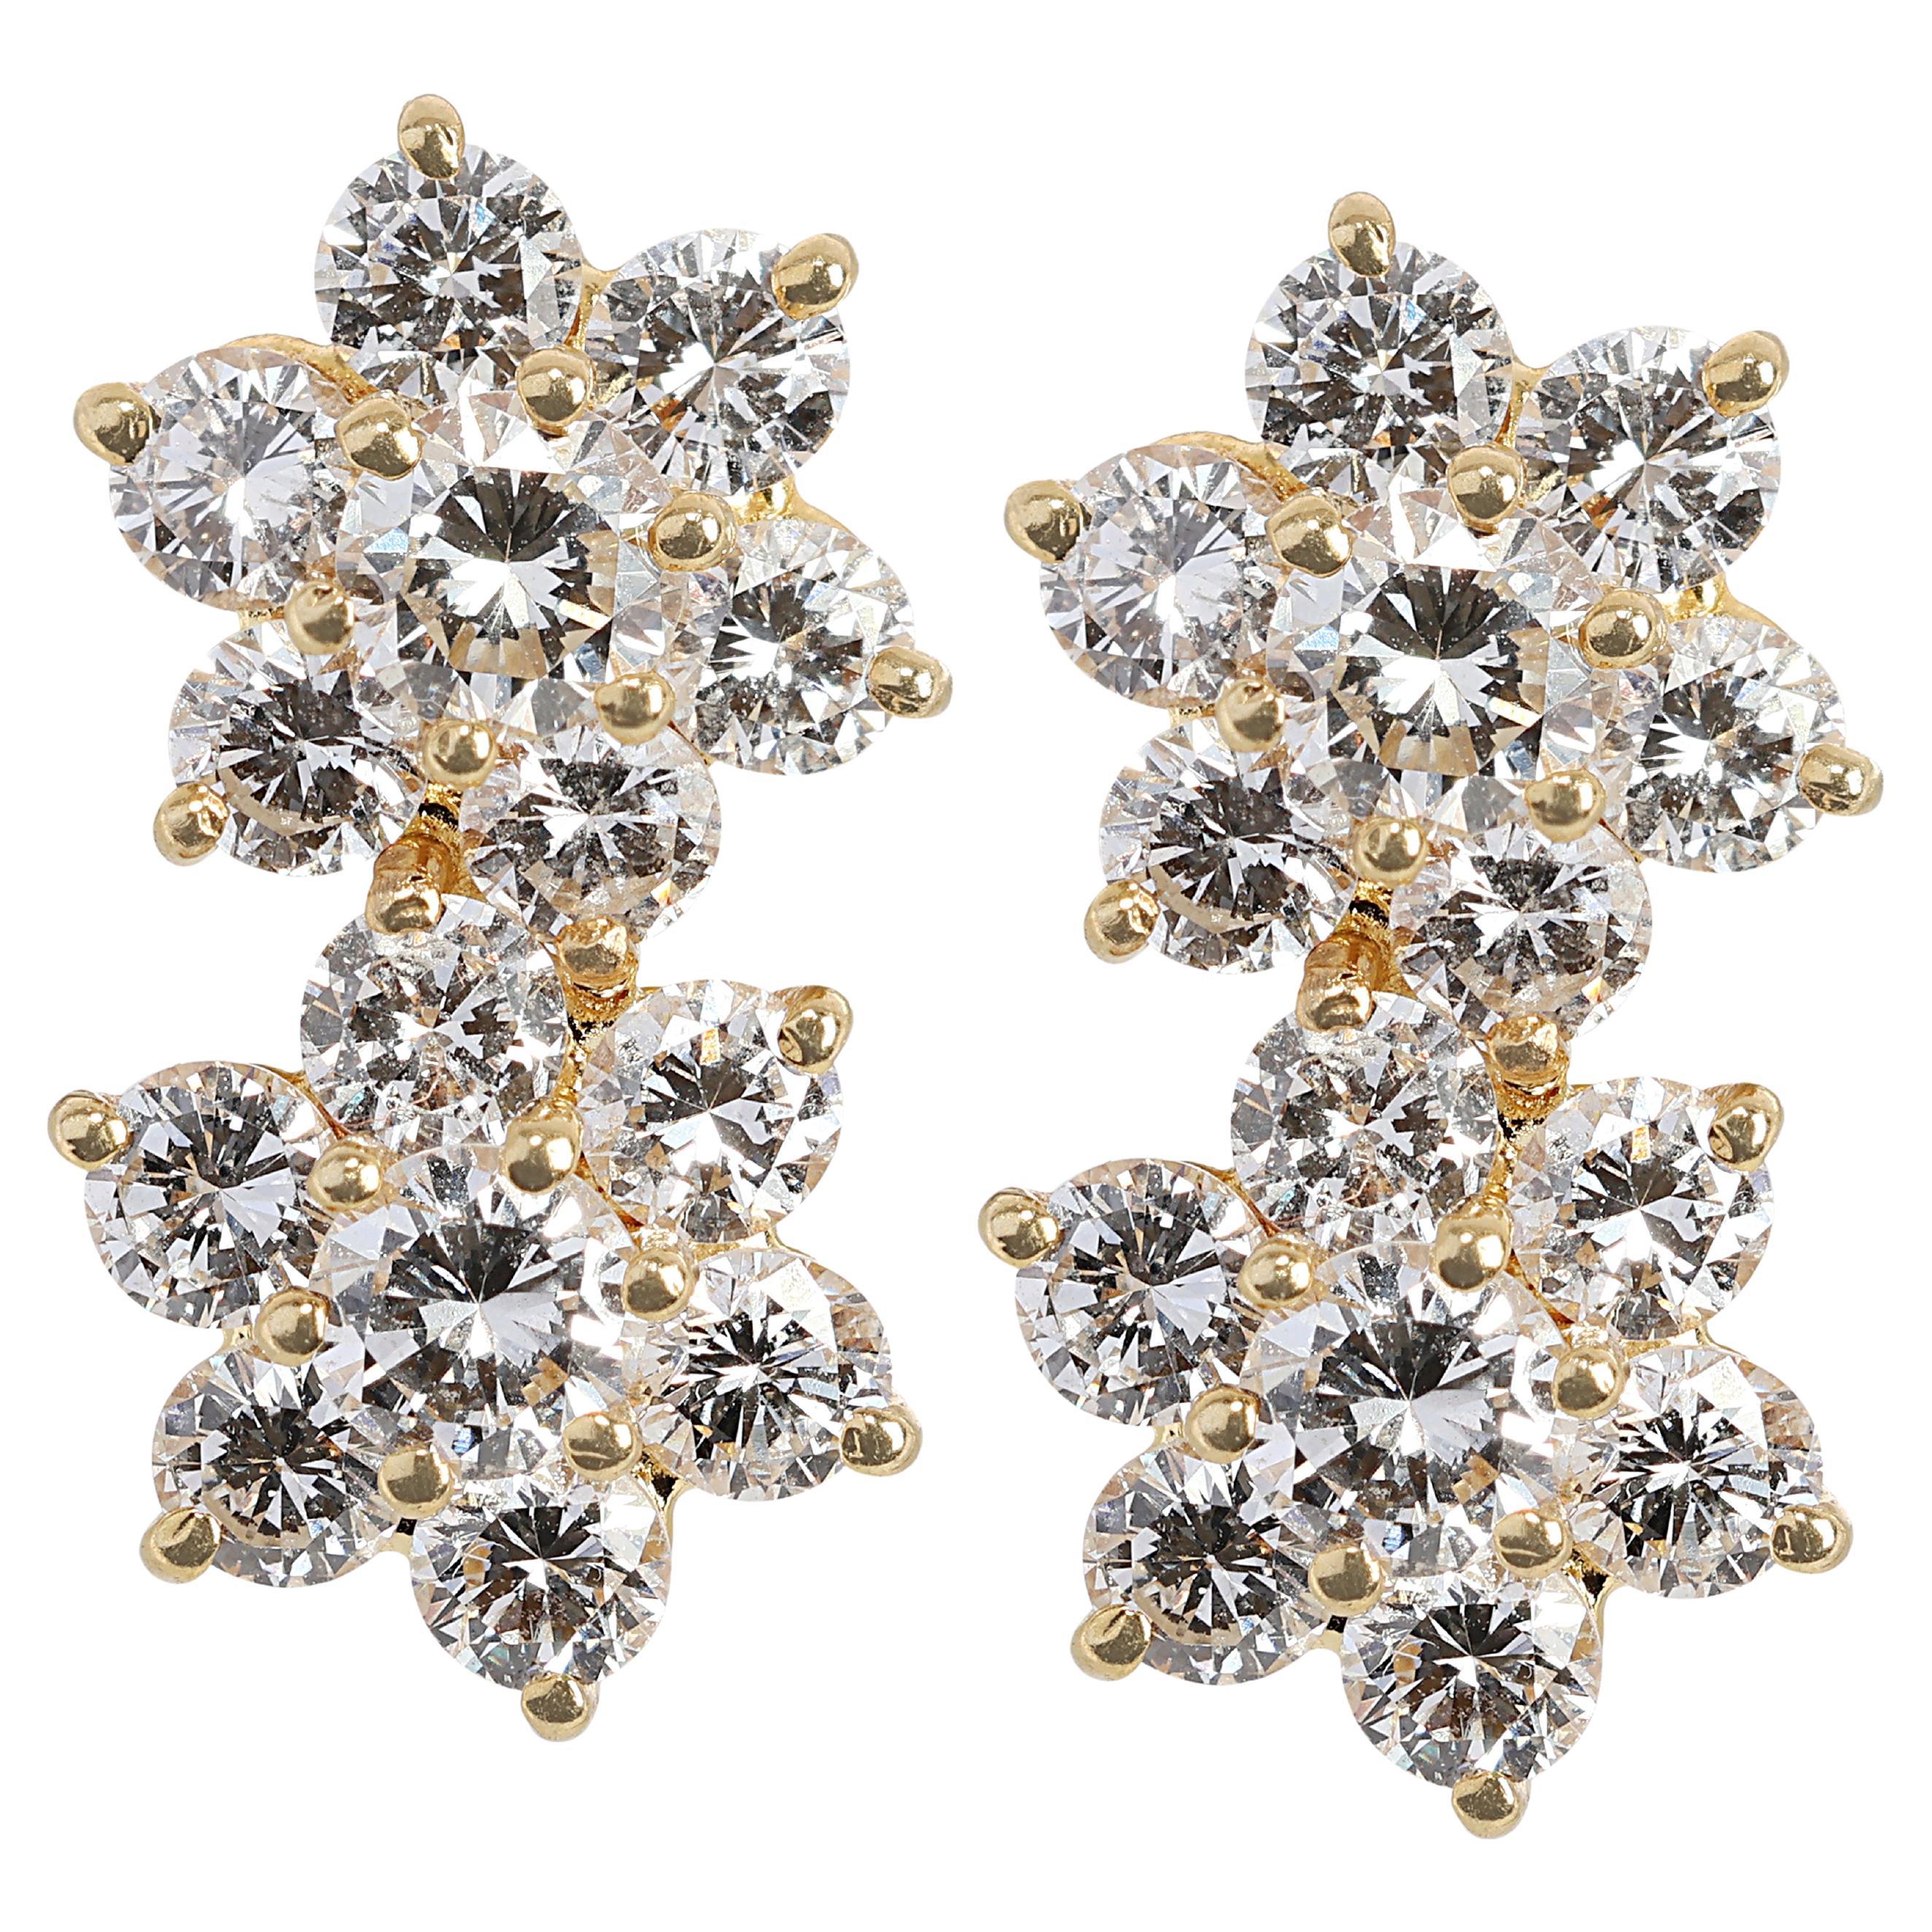 Stunning 1.52ct Diamonds Stud Earrings in 18K Yellow Gold For Sale